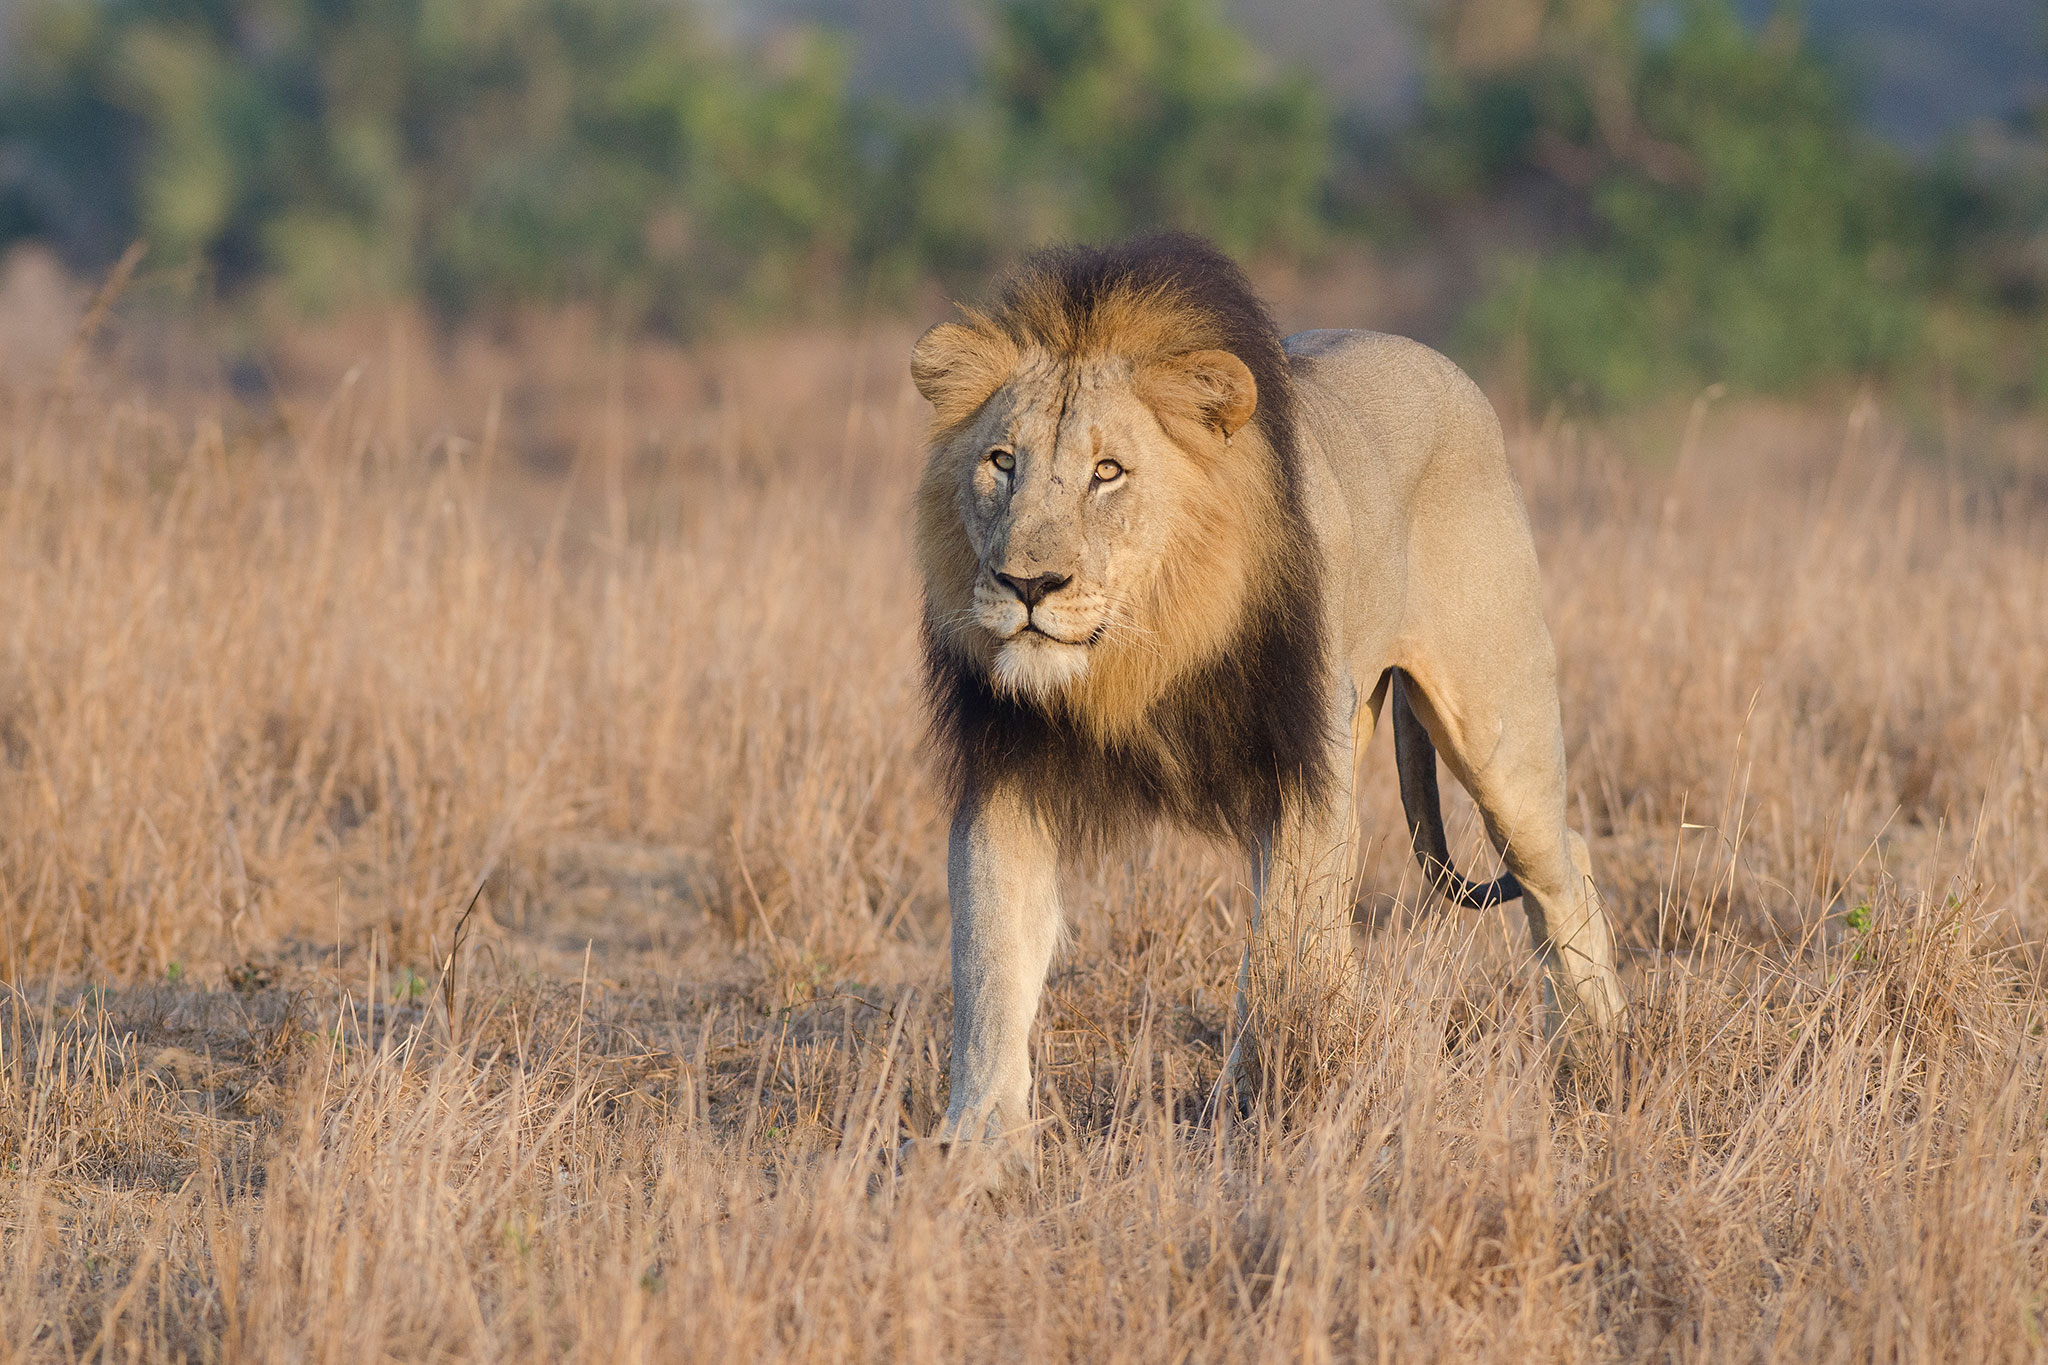 Suspected Poacher Killed and Eaten by Lions in South Africa